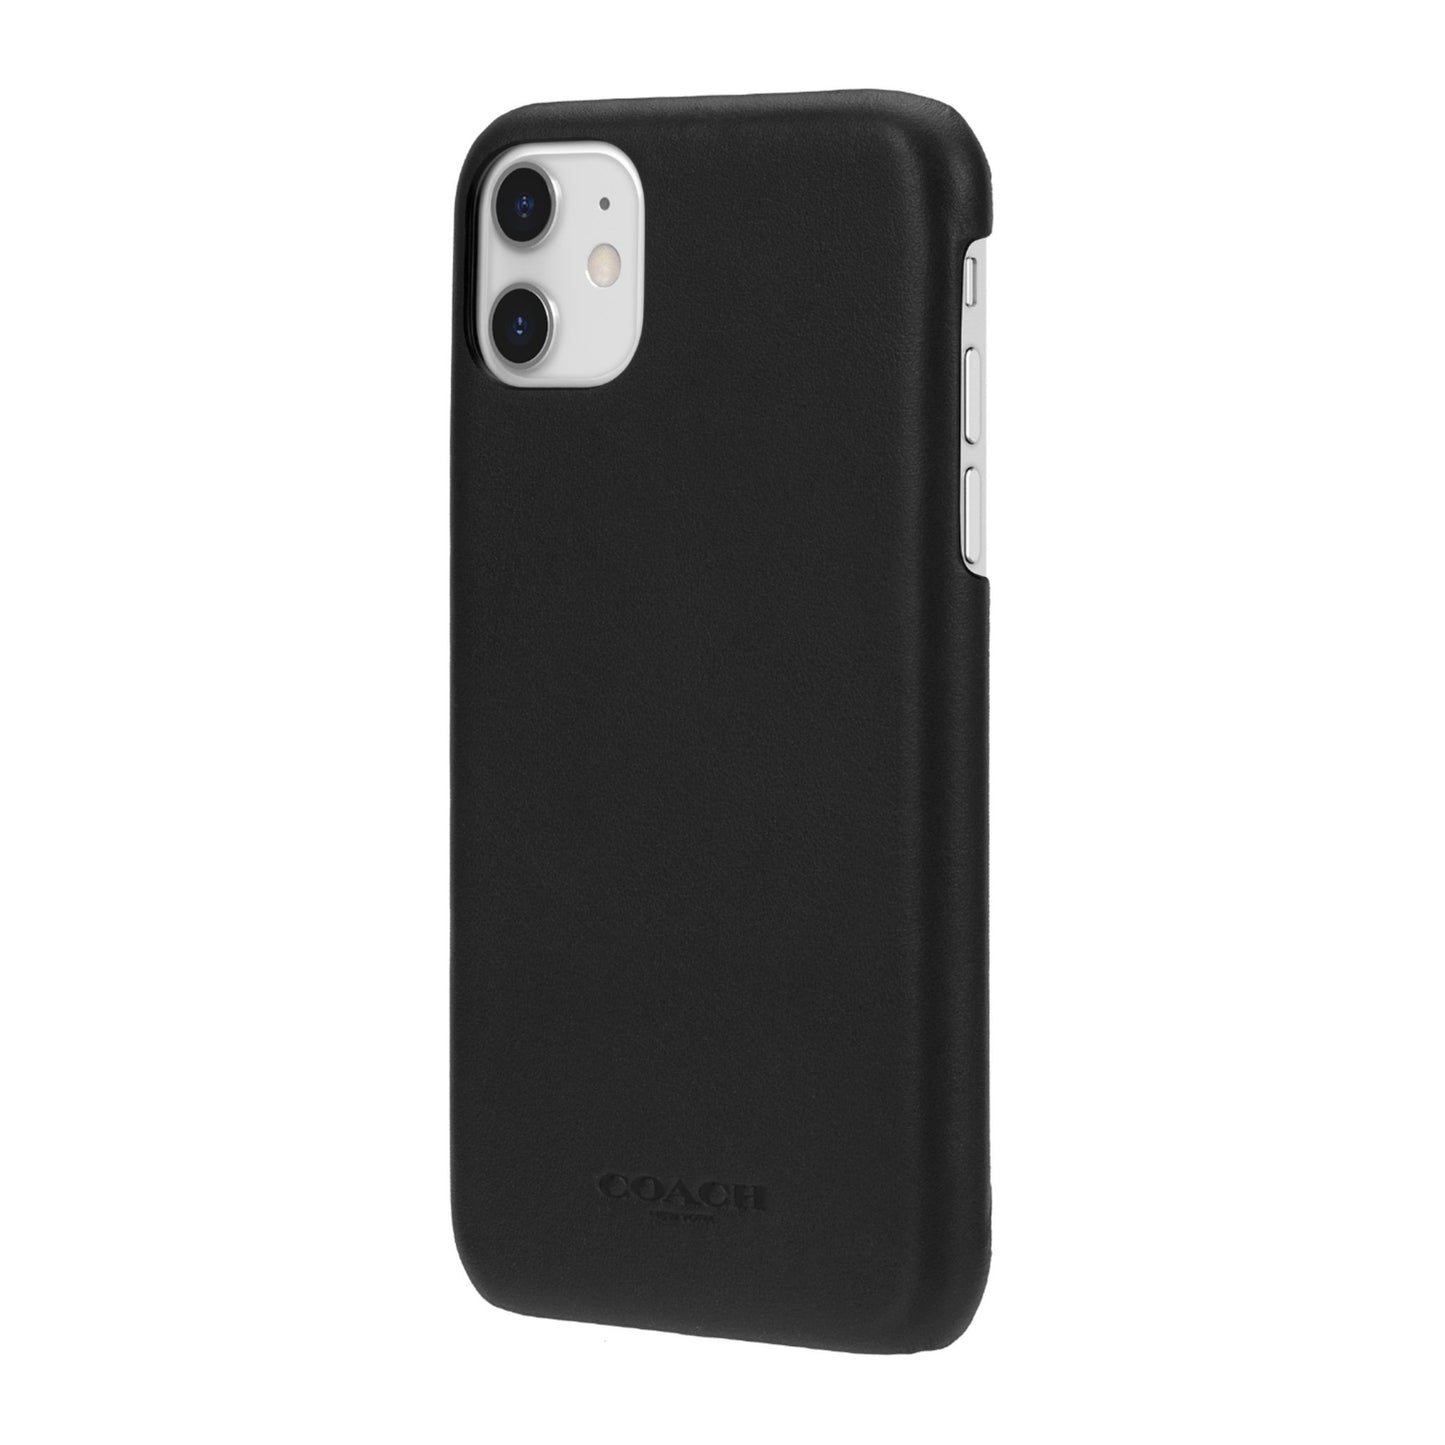 Coach - Leather Slim Protective Case for iPhone 12 Mini - Black